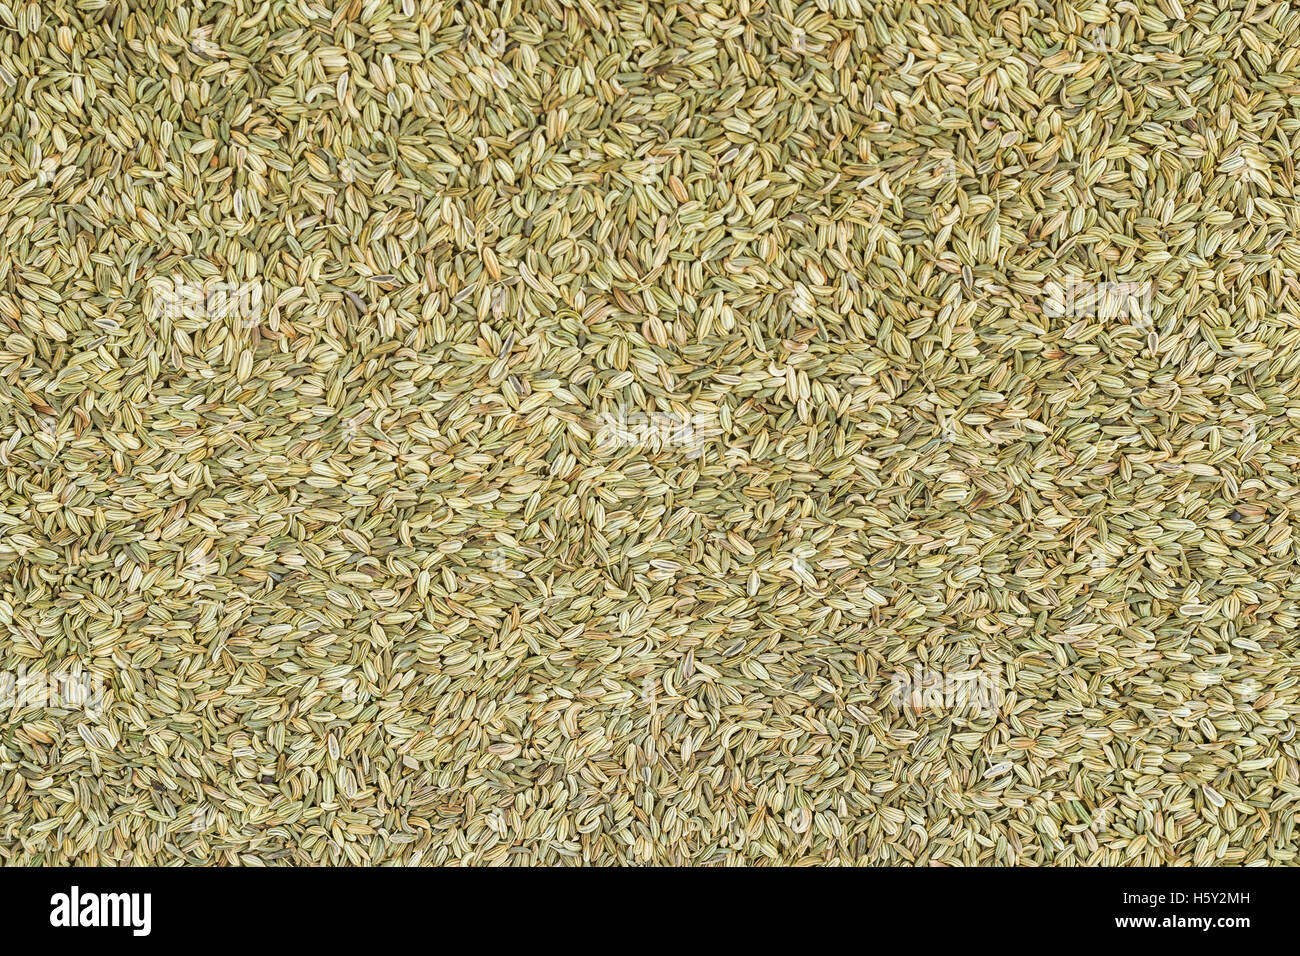 Top view of organic fennel seeds (saunf) Stock Photo